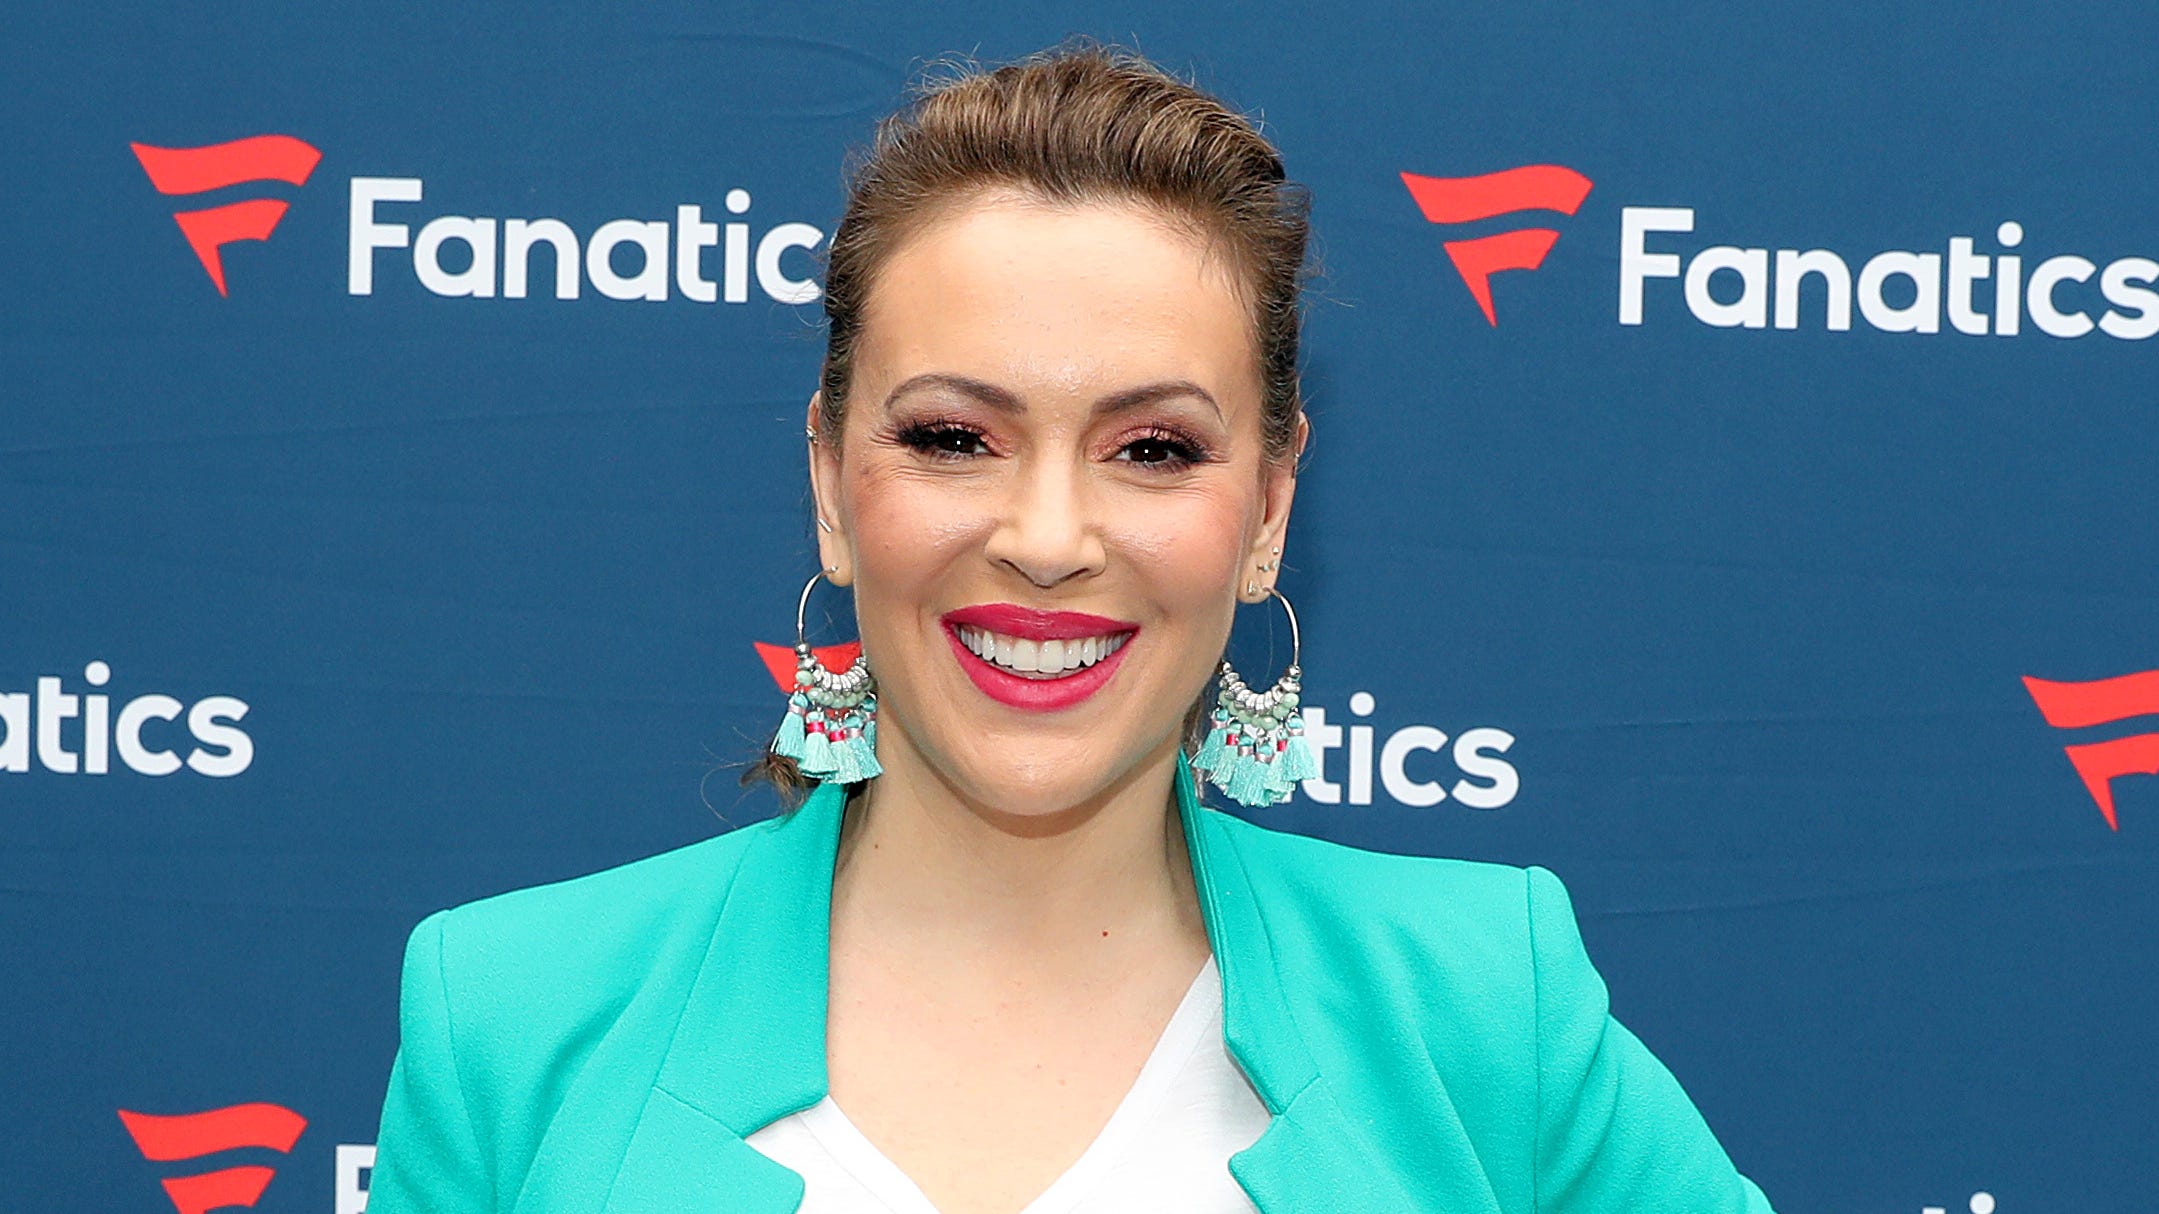 Alyssa Milano tests positive for COVID-19 antibodies after 3 negatives: 'Everything hurt' - USA TODAY